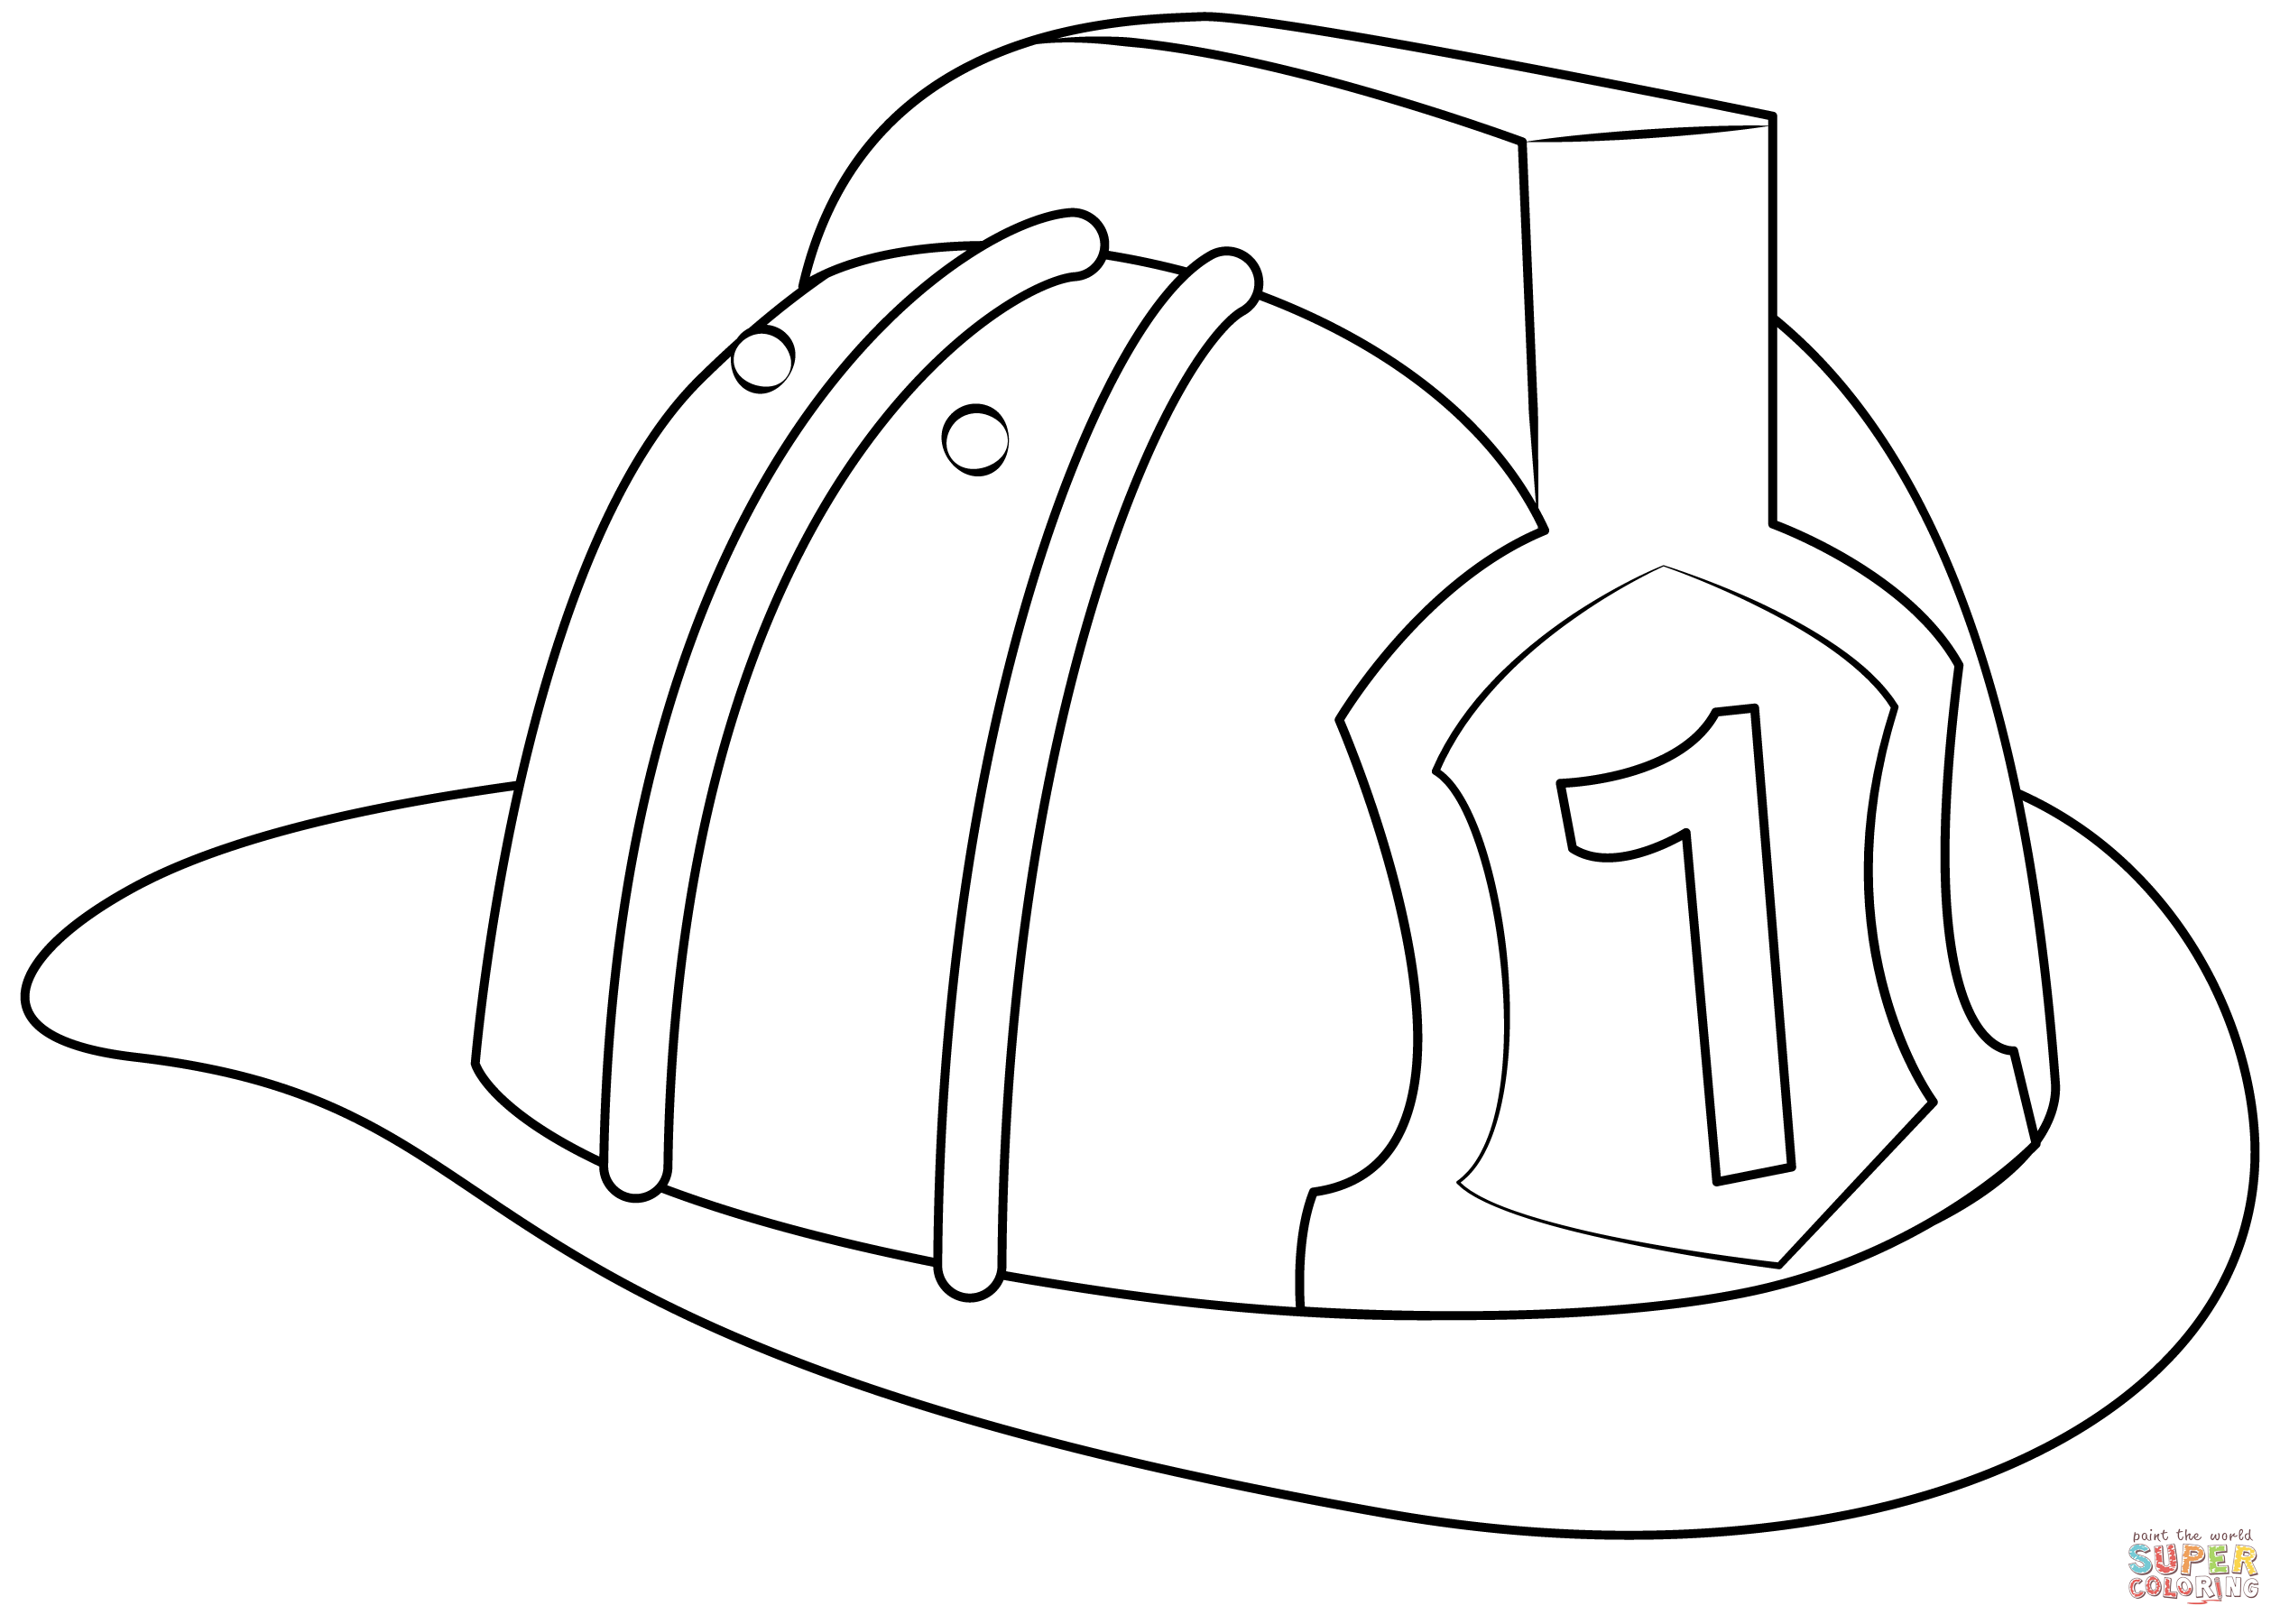 Firefighter Hat Coloring Page Free Printable Coloring Pages